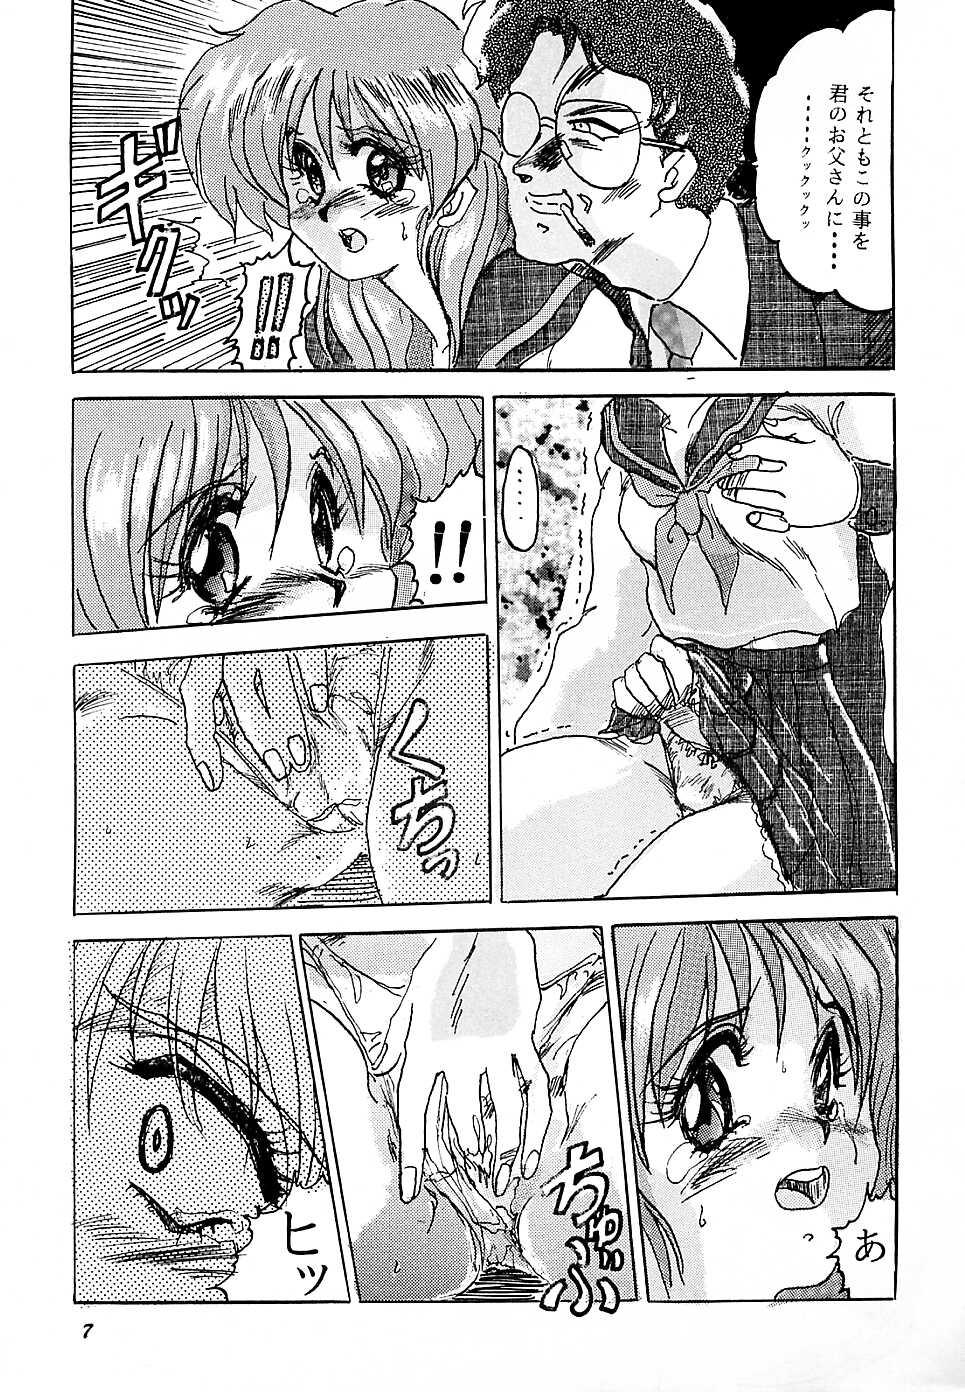 Fit F 93C - Brave express might gaine Big Dicks - Page 6